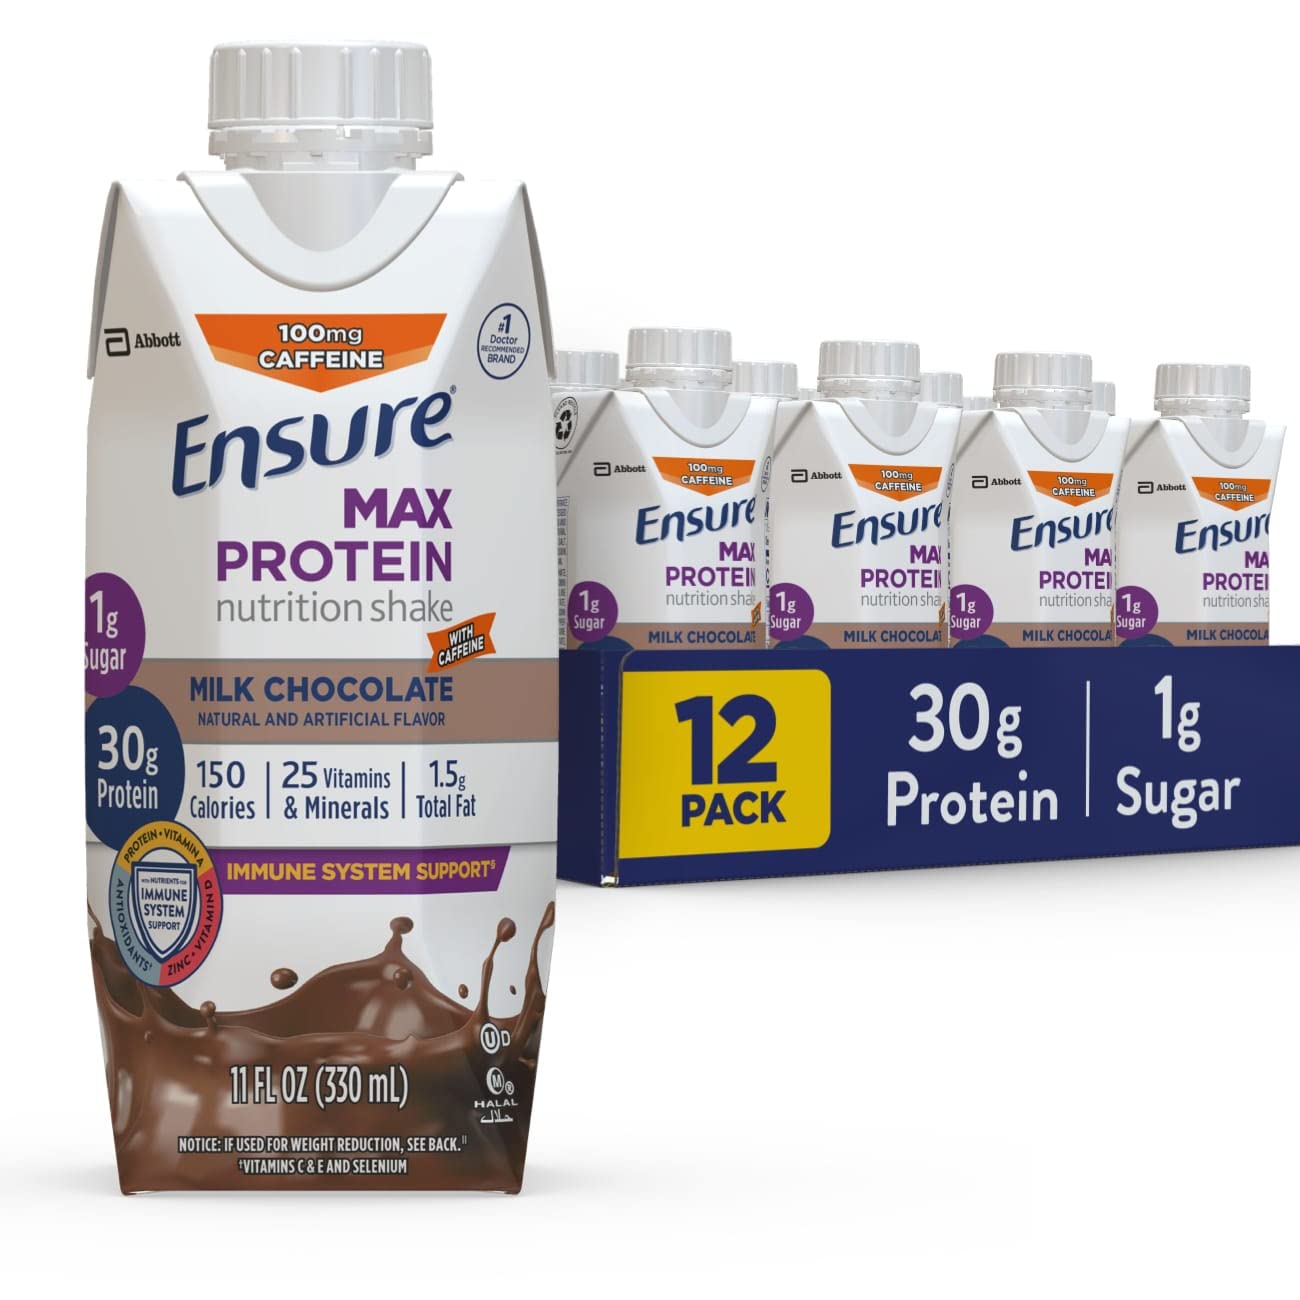 Ensure Max Protein Nutrition Shake with 30g of Protein 1g of Sugar High Protein Shake Milk with 11 fl oz, Chocolate w/ Caffeine, Pack of 12